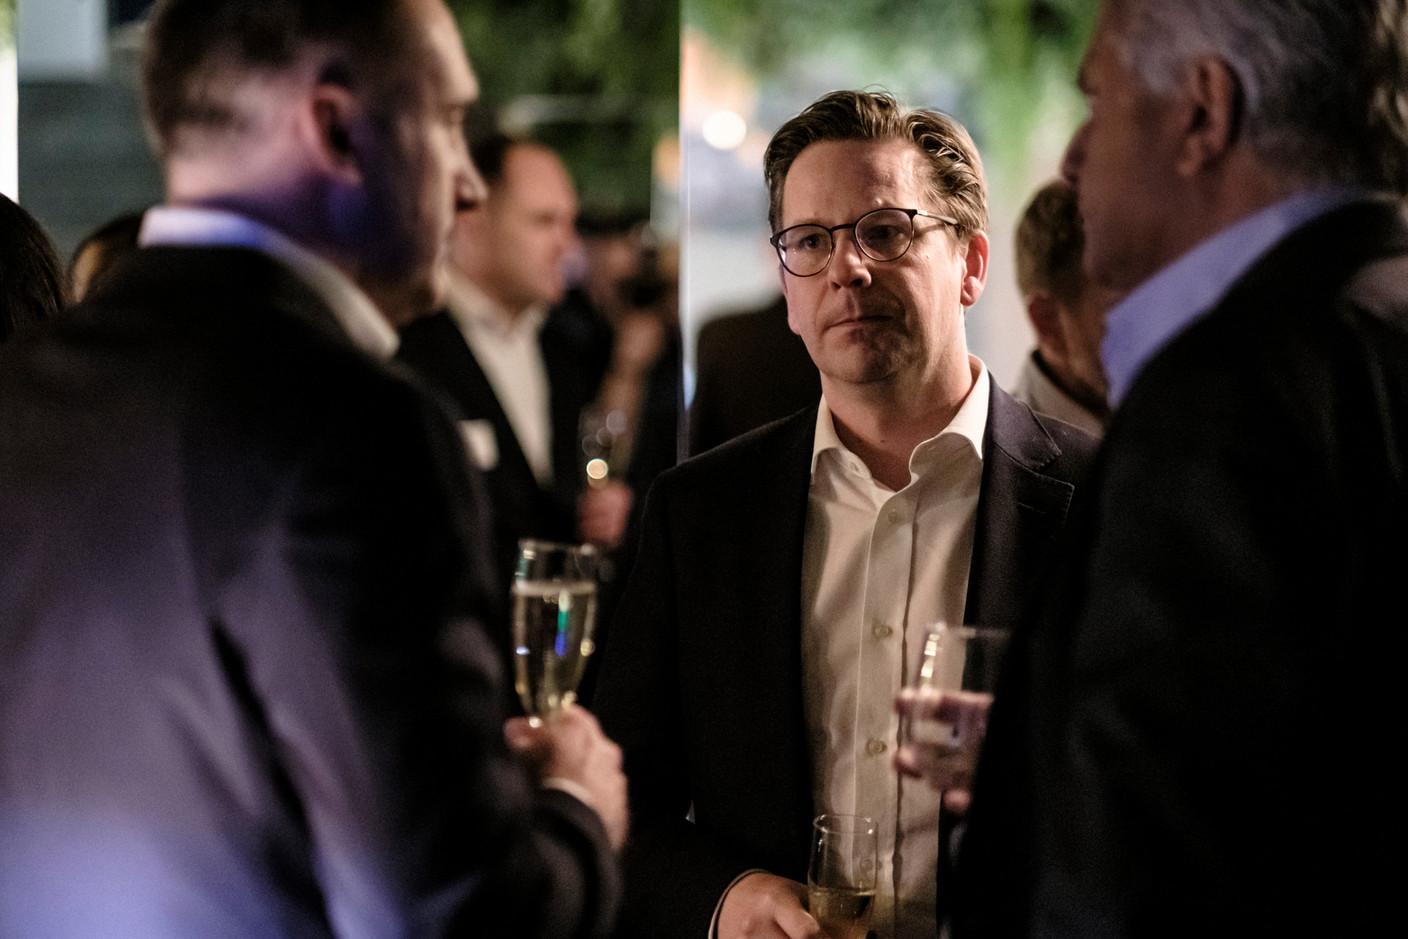 Johan Karlsson (Quintet Private Bank) at the Luxembourg Association of Family Offices (LAFO) winter 2023 cocktail, which took place on 8 February 2023 at Hertz PopUp. Photo: Jan Hanrion for LAFO